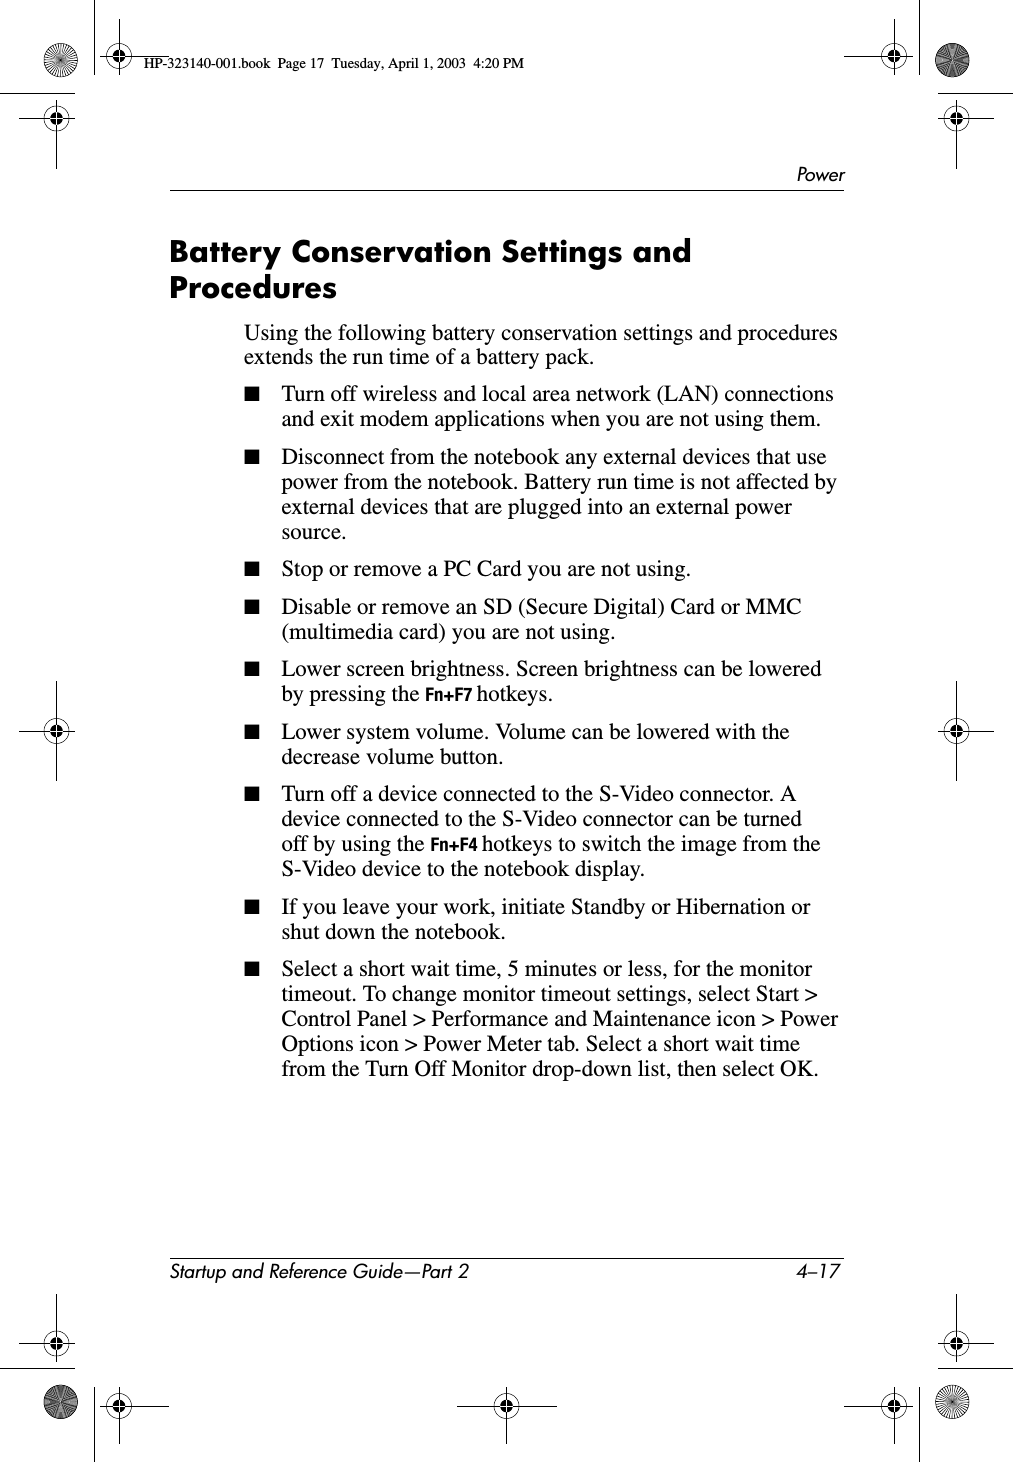 PowerStartup and Reference Guide—Part 2 4–17Battery Conservation Settings and ProceduresUsing the following battery conservation settings and procedures extends the run time of a battery pack.■Turn off wireless and local area network (LAN) connections and exit modem applications when you are not using them.■Disconnect from the notebook any external devices that use power from the notebook. Battery run time is not affected by external devices that are plugged into an external power source.■Stop or remove a PC Card you are not using.■Disable or remove an SD (Secure Digital) Card or MMC (multimedia card) you are not using.■Lower screen brightness. Screen brightness can be lowered by pressing the Fn+F7 hotkeys.■Lower system volume. Volume can be lowered with the decrease volume button.■Turn off a device connected to the S-Video connector. A device connected to the S-Video connector can be turned off by using the Fn+F4 hotkeys to switch the image from the S-Video device to the notebook display.■If you leave your work, initiate Standby or Hibernation or shut down the notebook.■Select a short wait time, 5 minutes or less, for the monitor timeout. To change monitor timeout settings, select Start &gt; Control Panel &gt; Performance and Maintenance icon &gt; Power Options icon &gt; Power Meter tab. Select a short wait time from the Turn Off Monitor drop-down list, then select OK.HP-323140-001.book  Page 17  Tuesday, April 1, 2003  4:20 PM